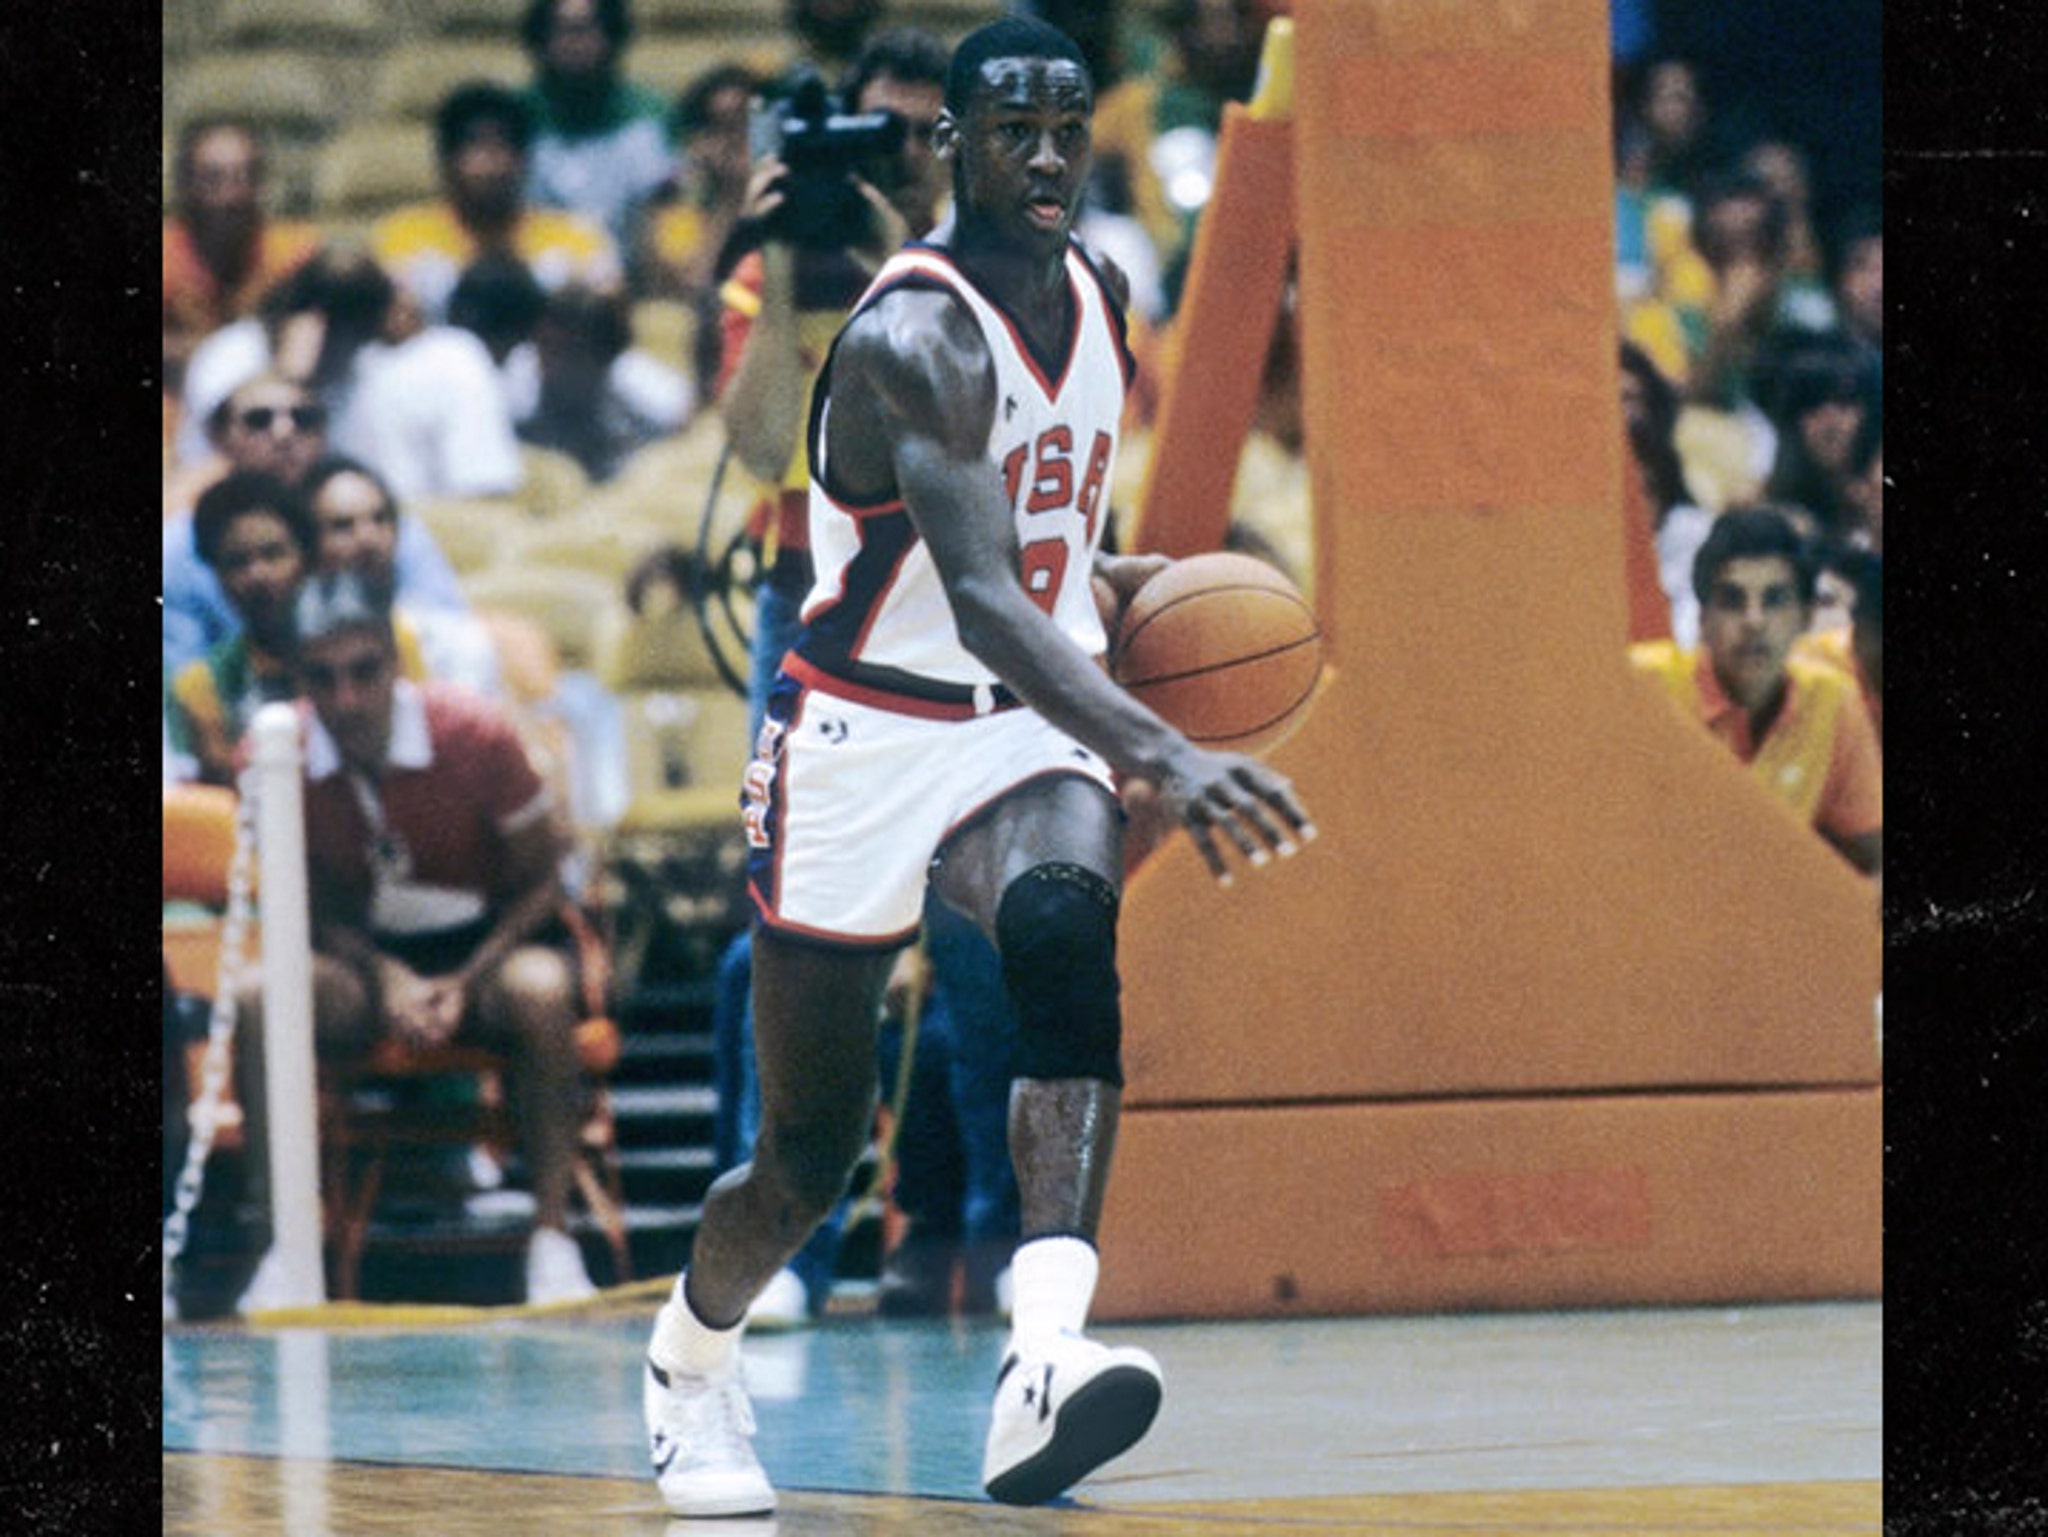 Basketball great Michael Jordan's 1984 Olympic shoes sell for $252,000